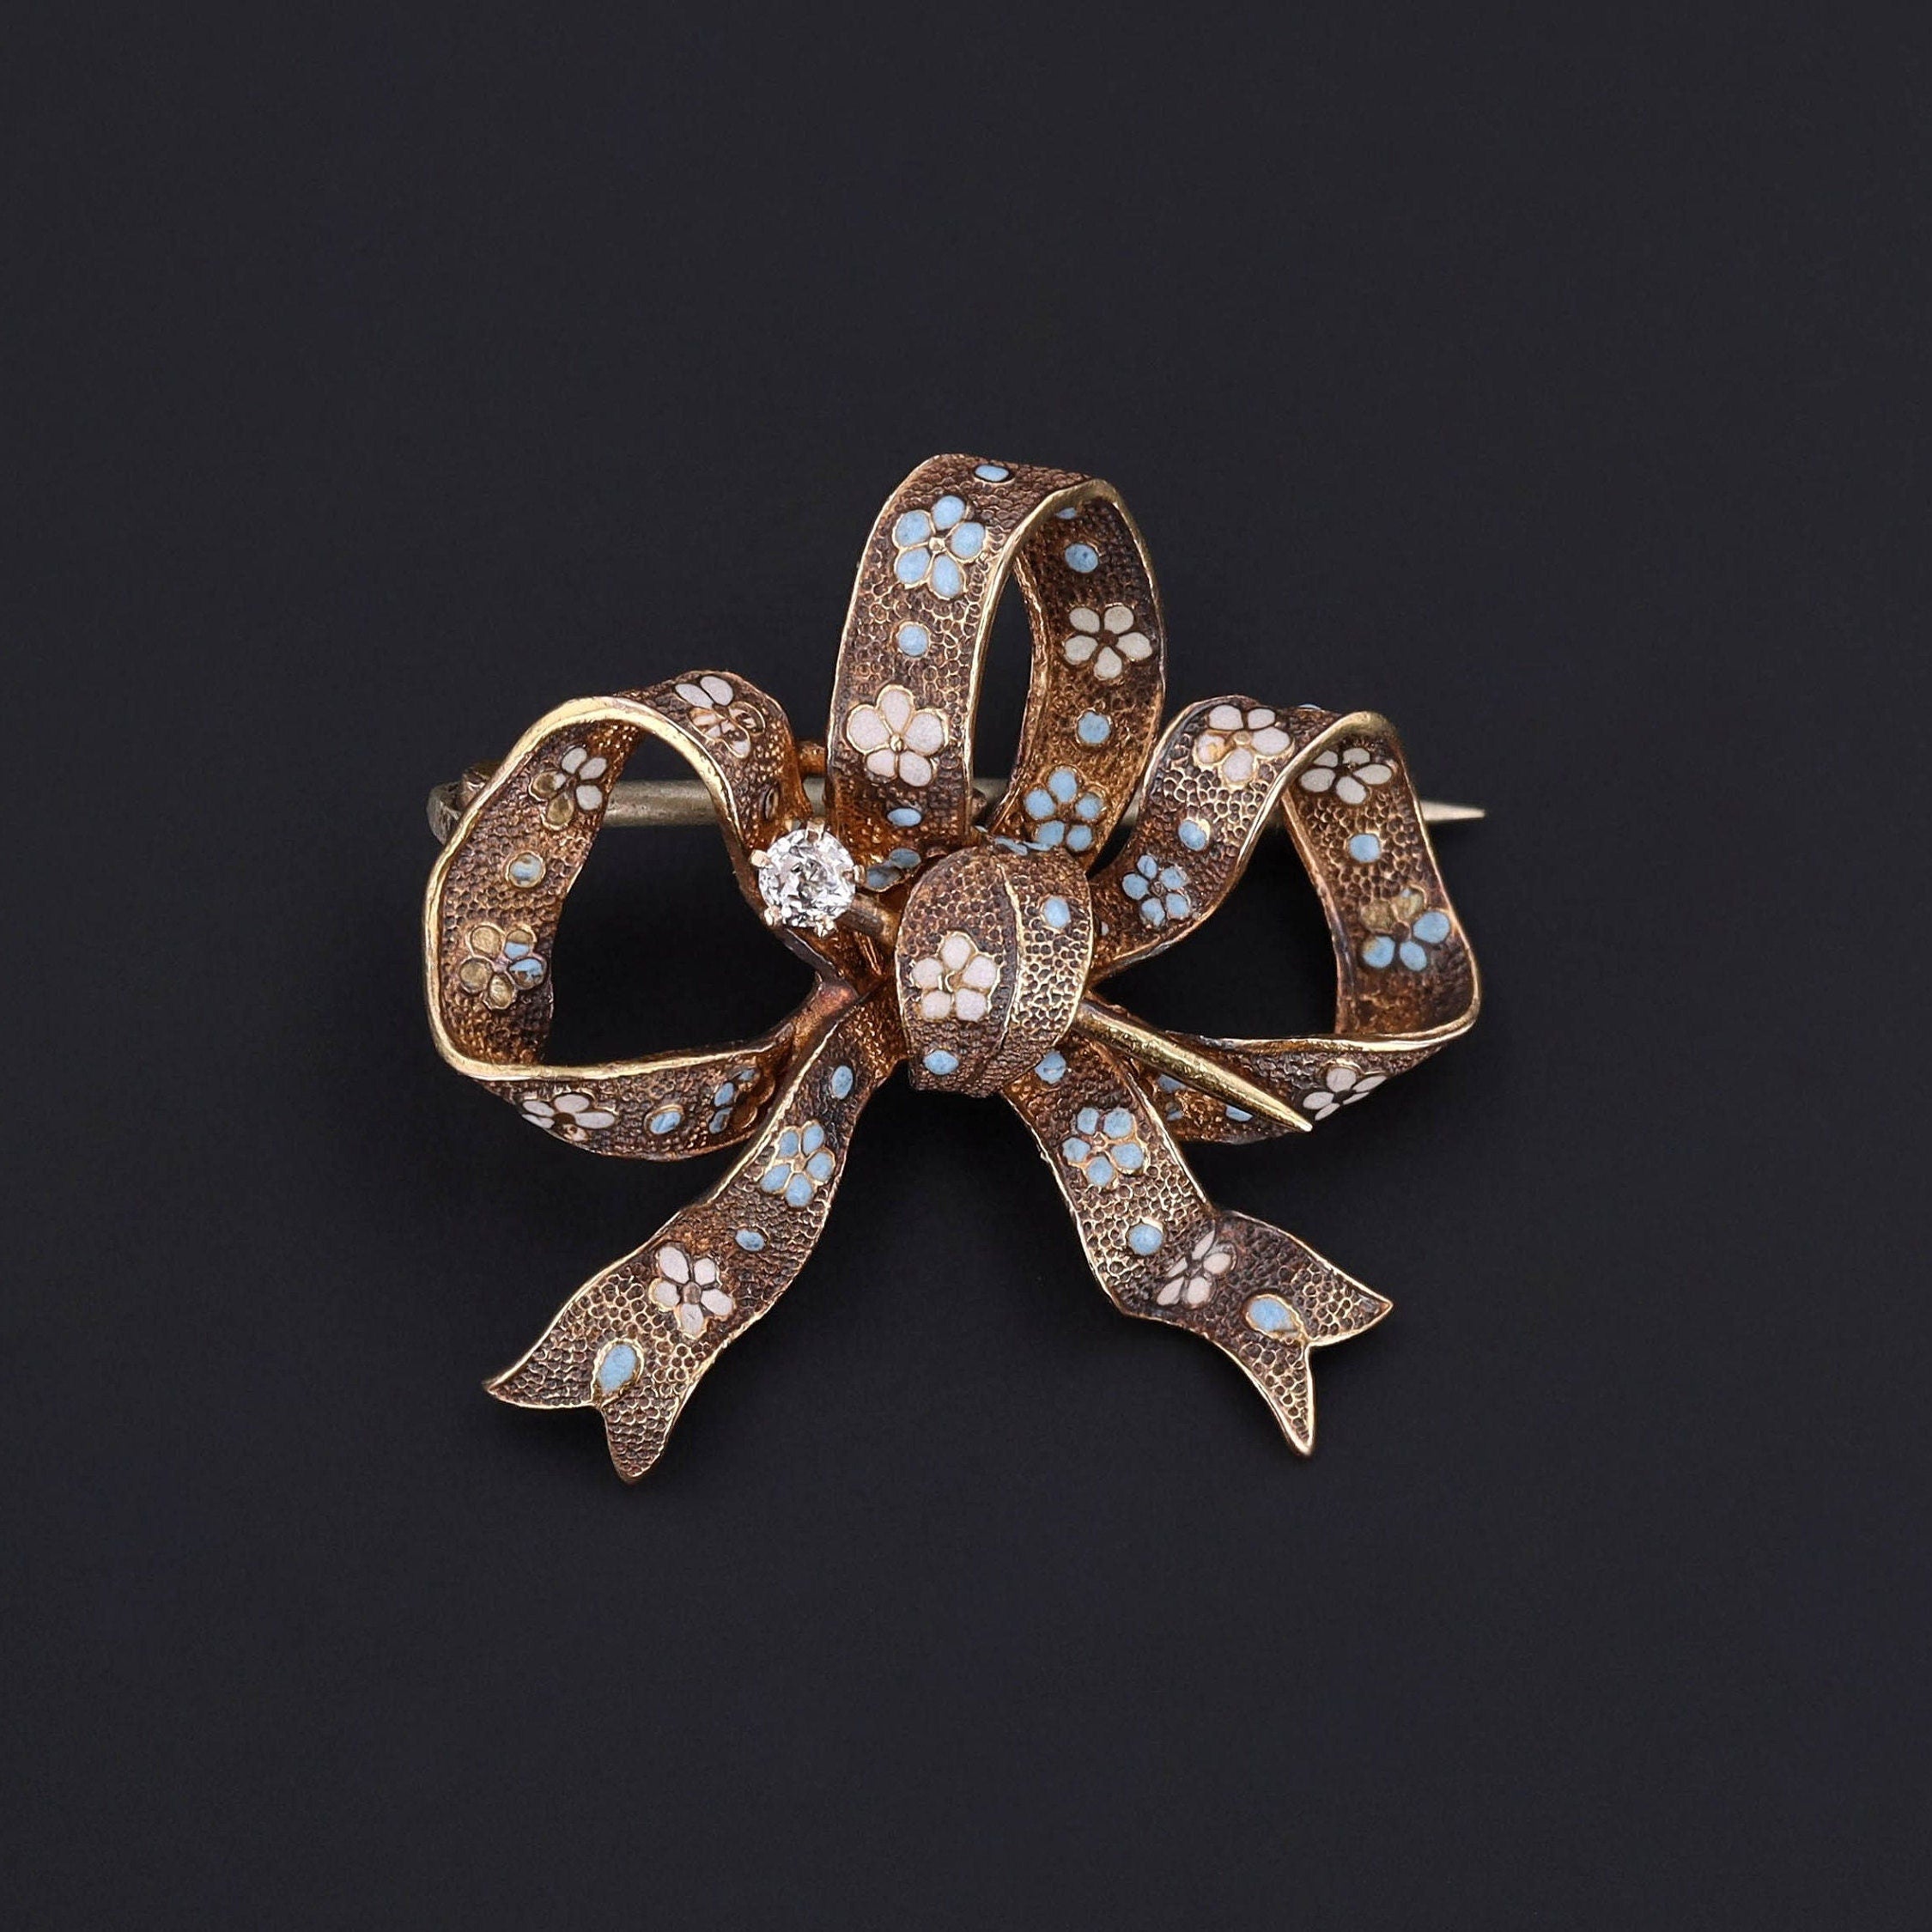 Antique Enamel and Diamond Bow Brooch of 14K Gold | Trademark Antiques